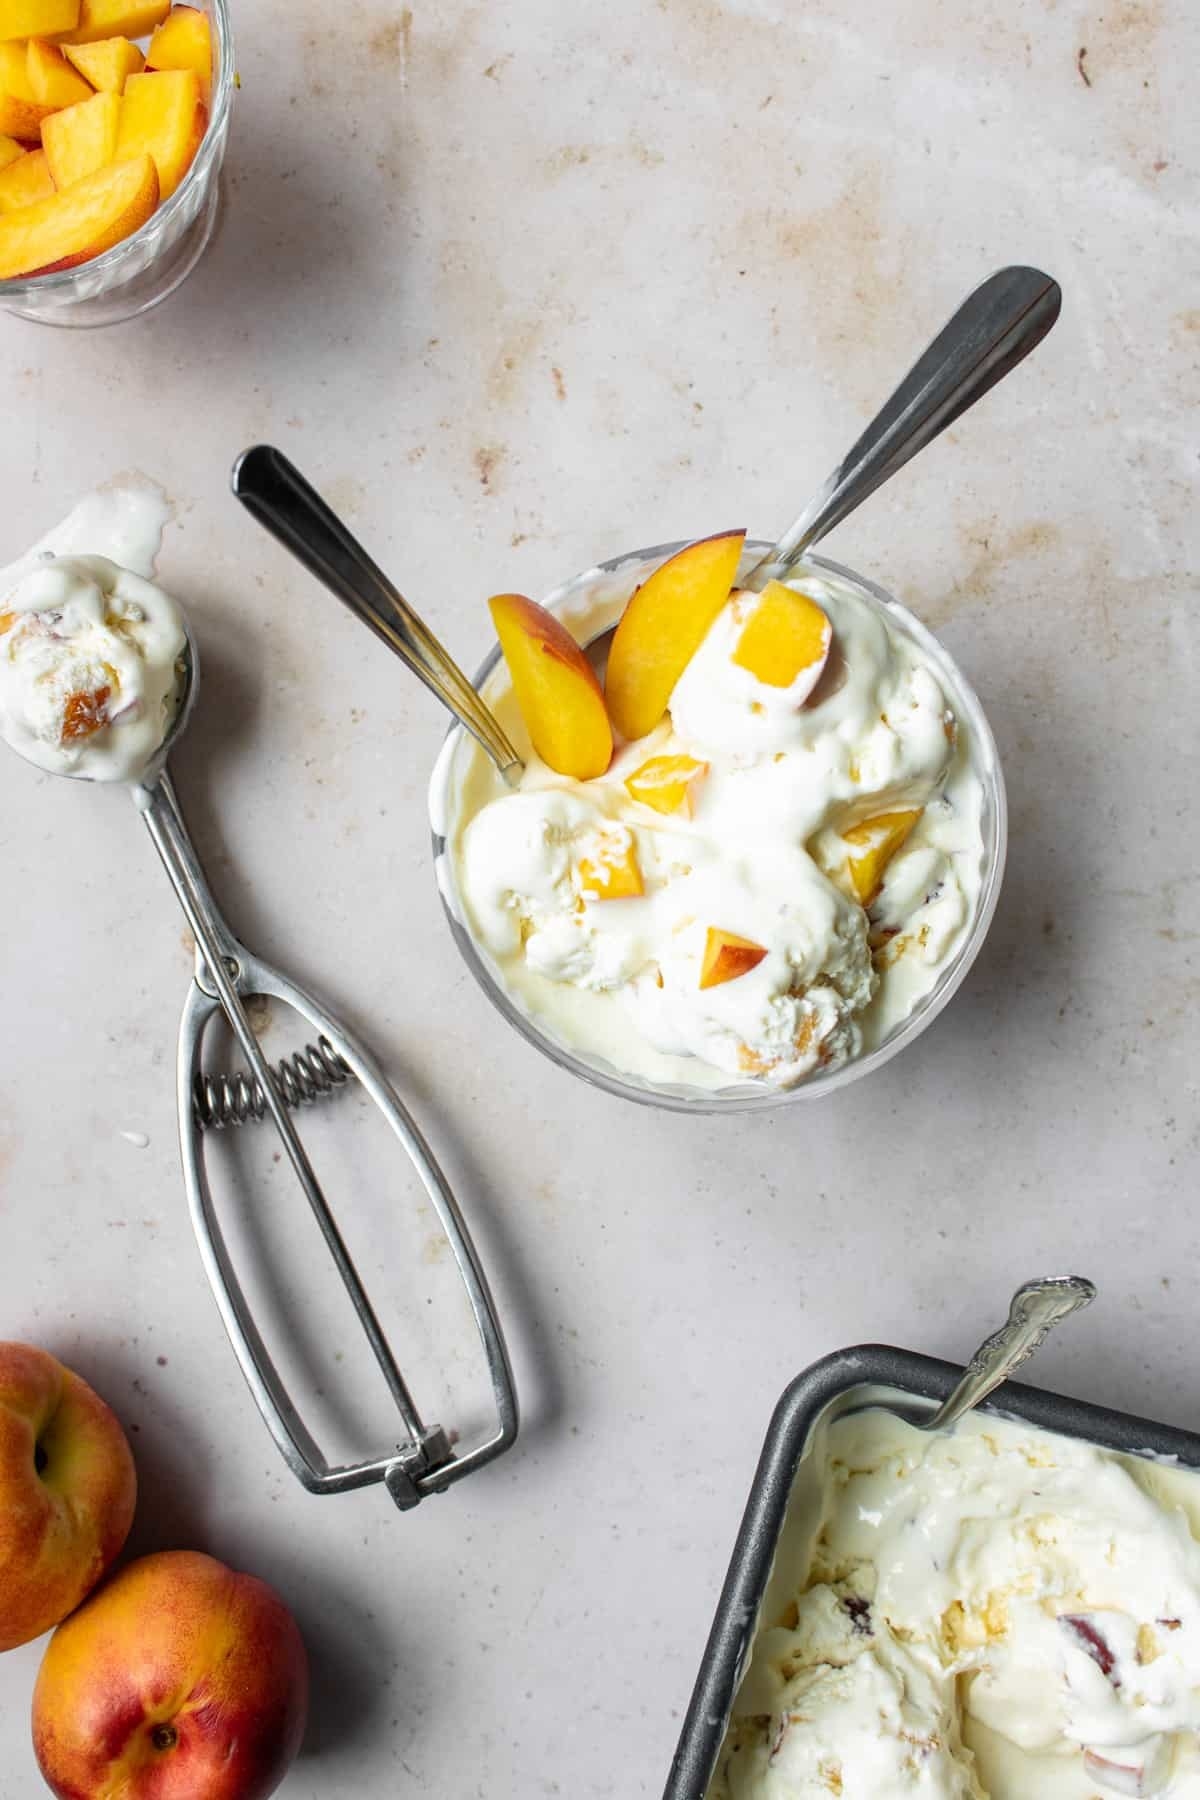 Peach ice cream in a bowl and in a scoop on a surface with whole peaches.